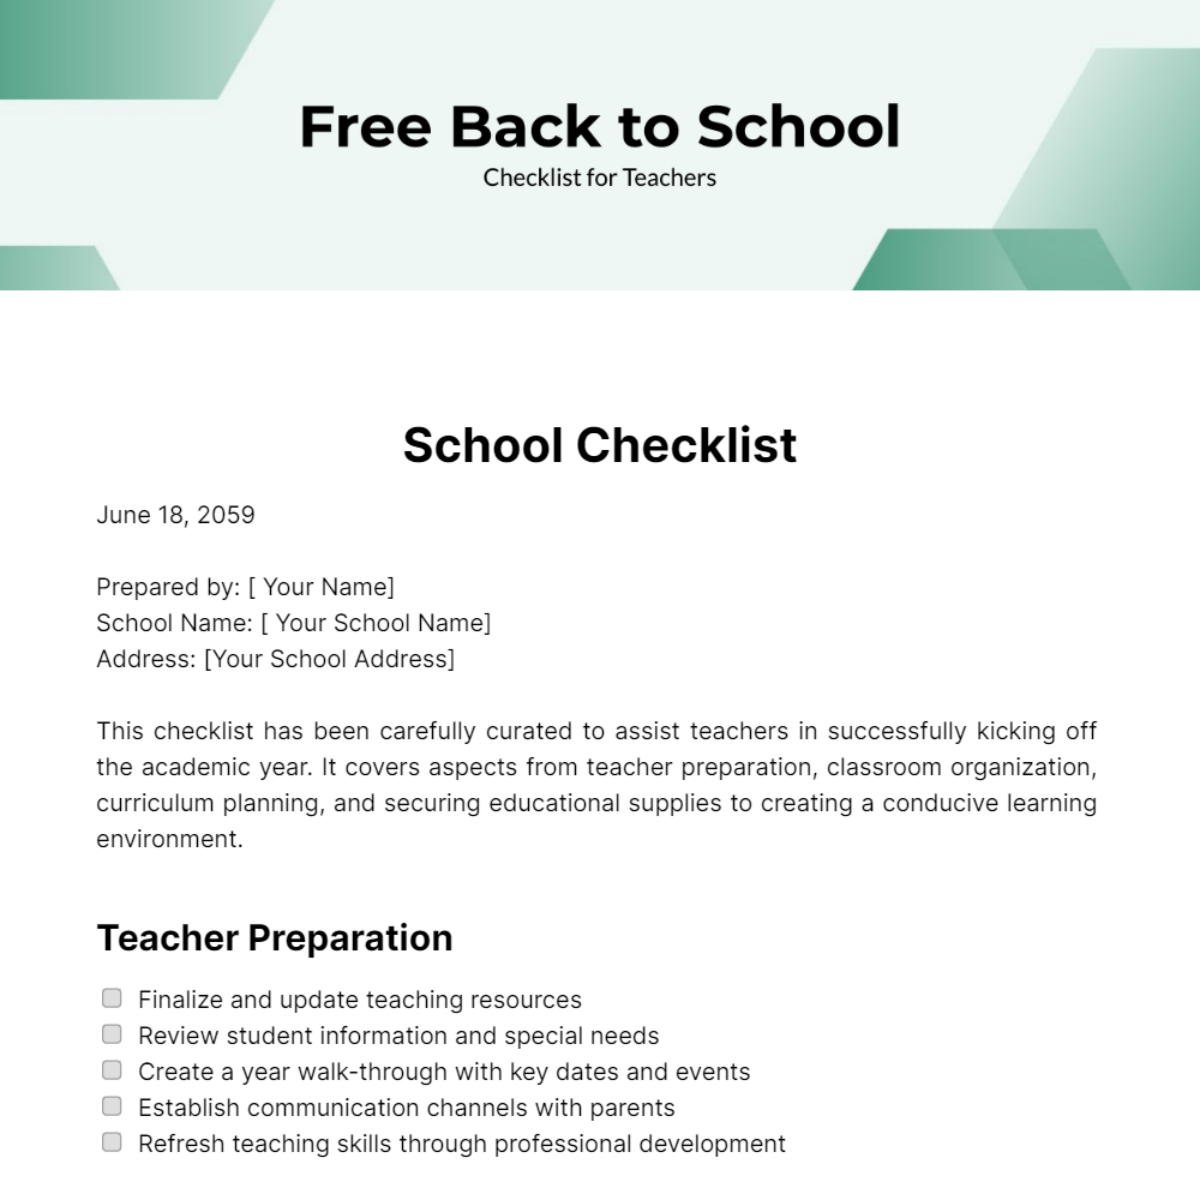 Free Back to School Checklist for Teachers Template